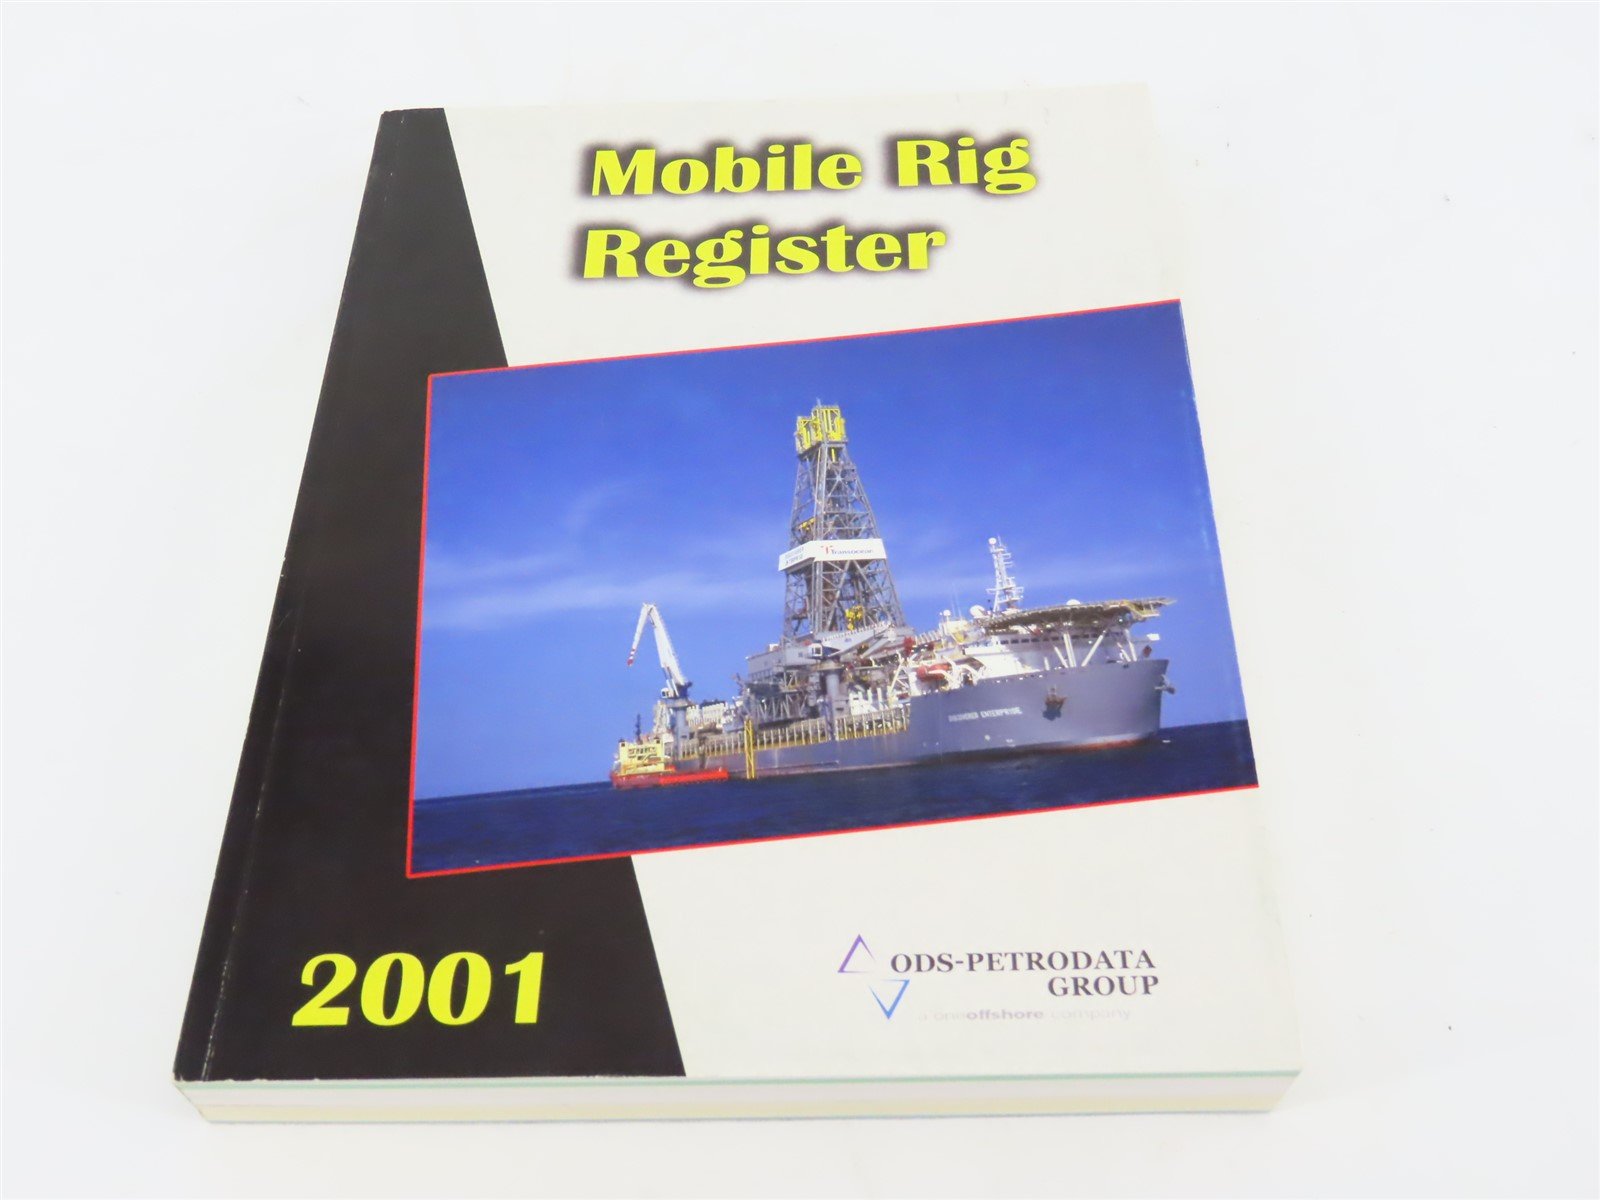 Mobile Rig Register 2001 Seventh Edition by ODS-Petrodata Group ©2001 SC Book